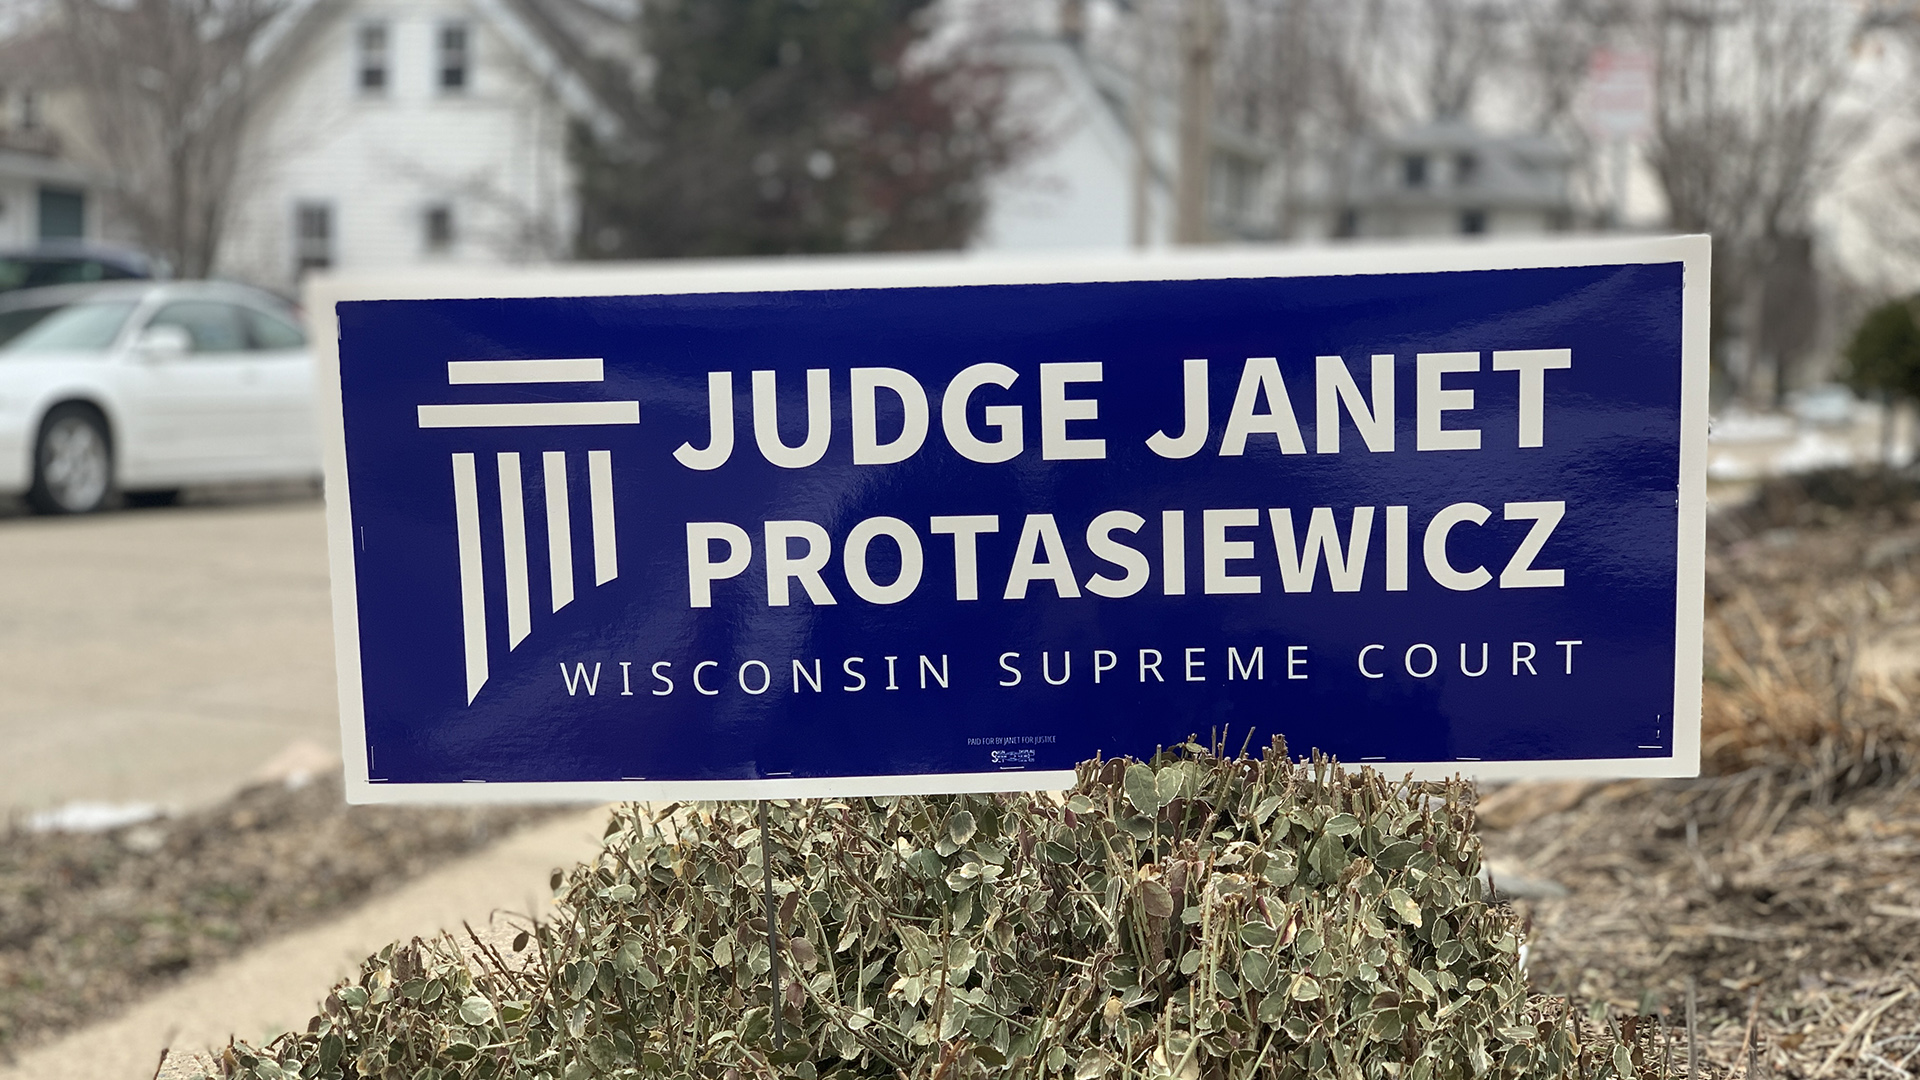 A campaign yard sign with a pillar graphic and the words "Judge Janet Protasiewicz" and "Wisconsin Supreme Court" stands behind a shrub in a yard next to a sidewalk, with a street, parked car, houses and trees in the background.